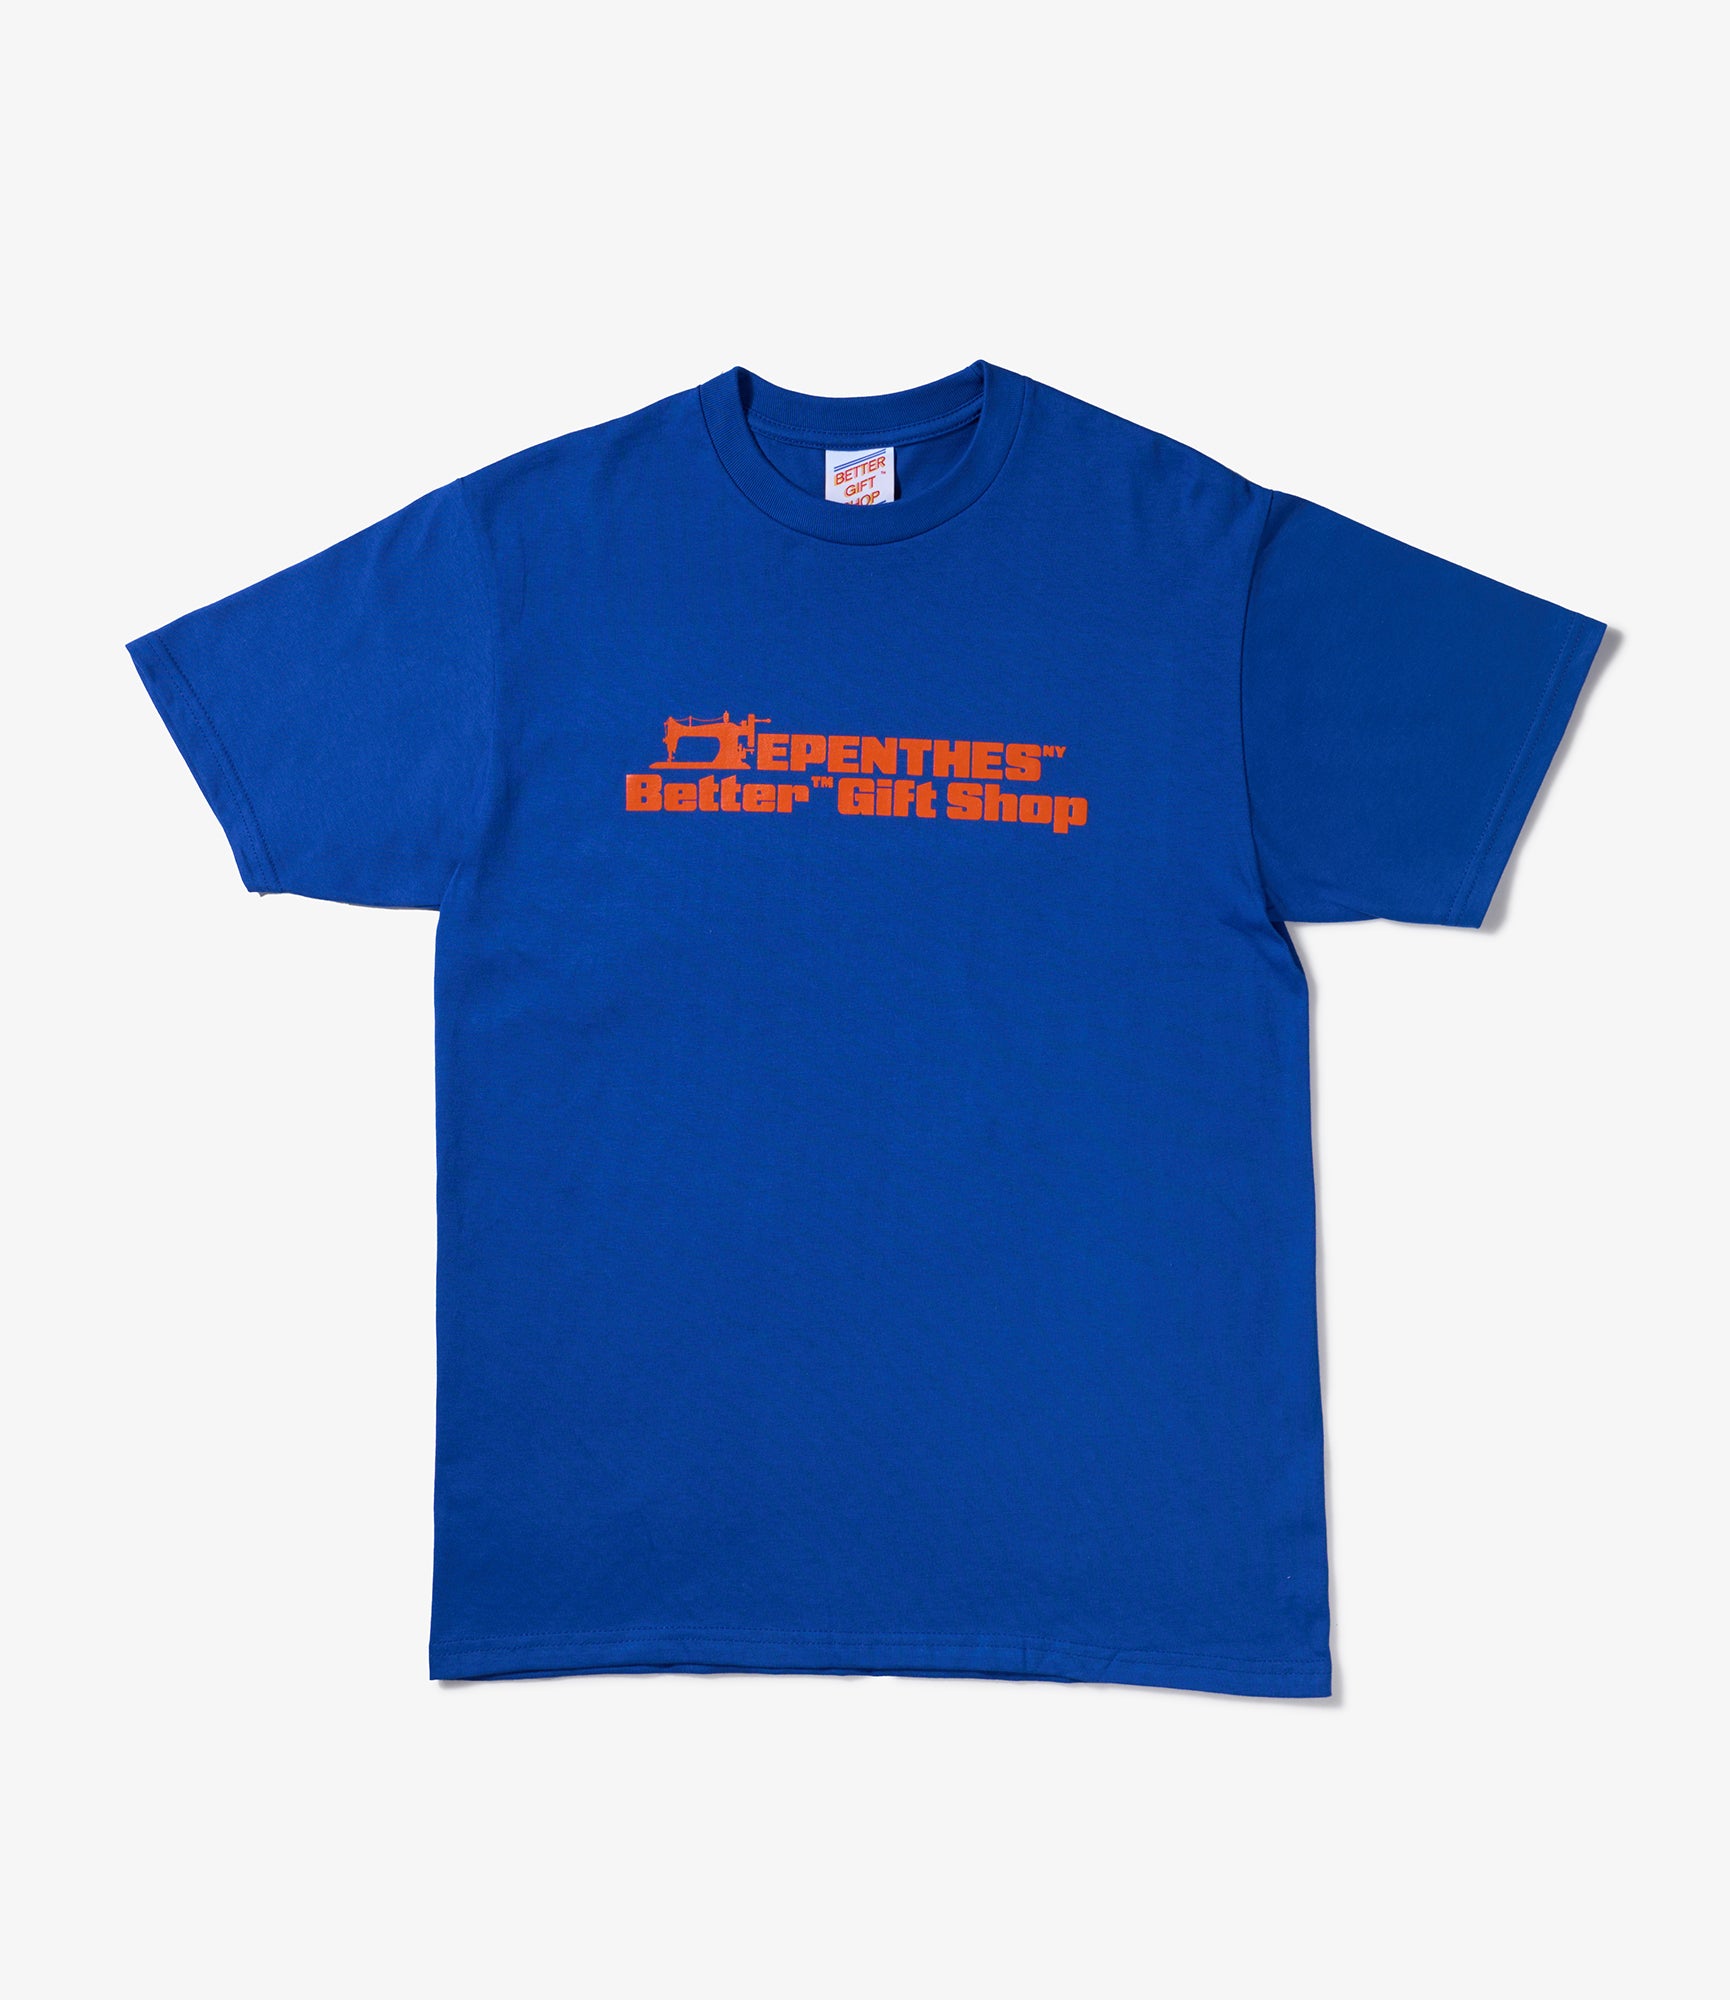 Nepenthes New York x Better Gift Shop - Sewing T-Shirt - Royal Blue